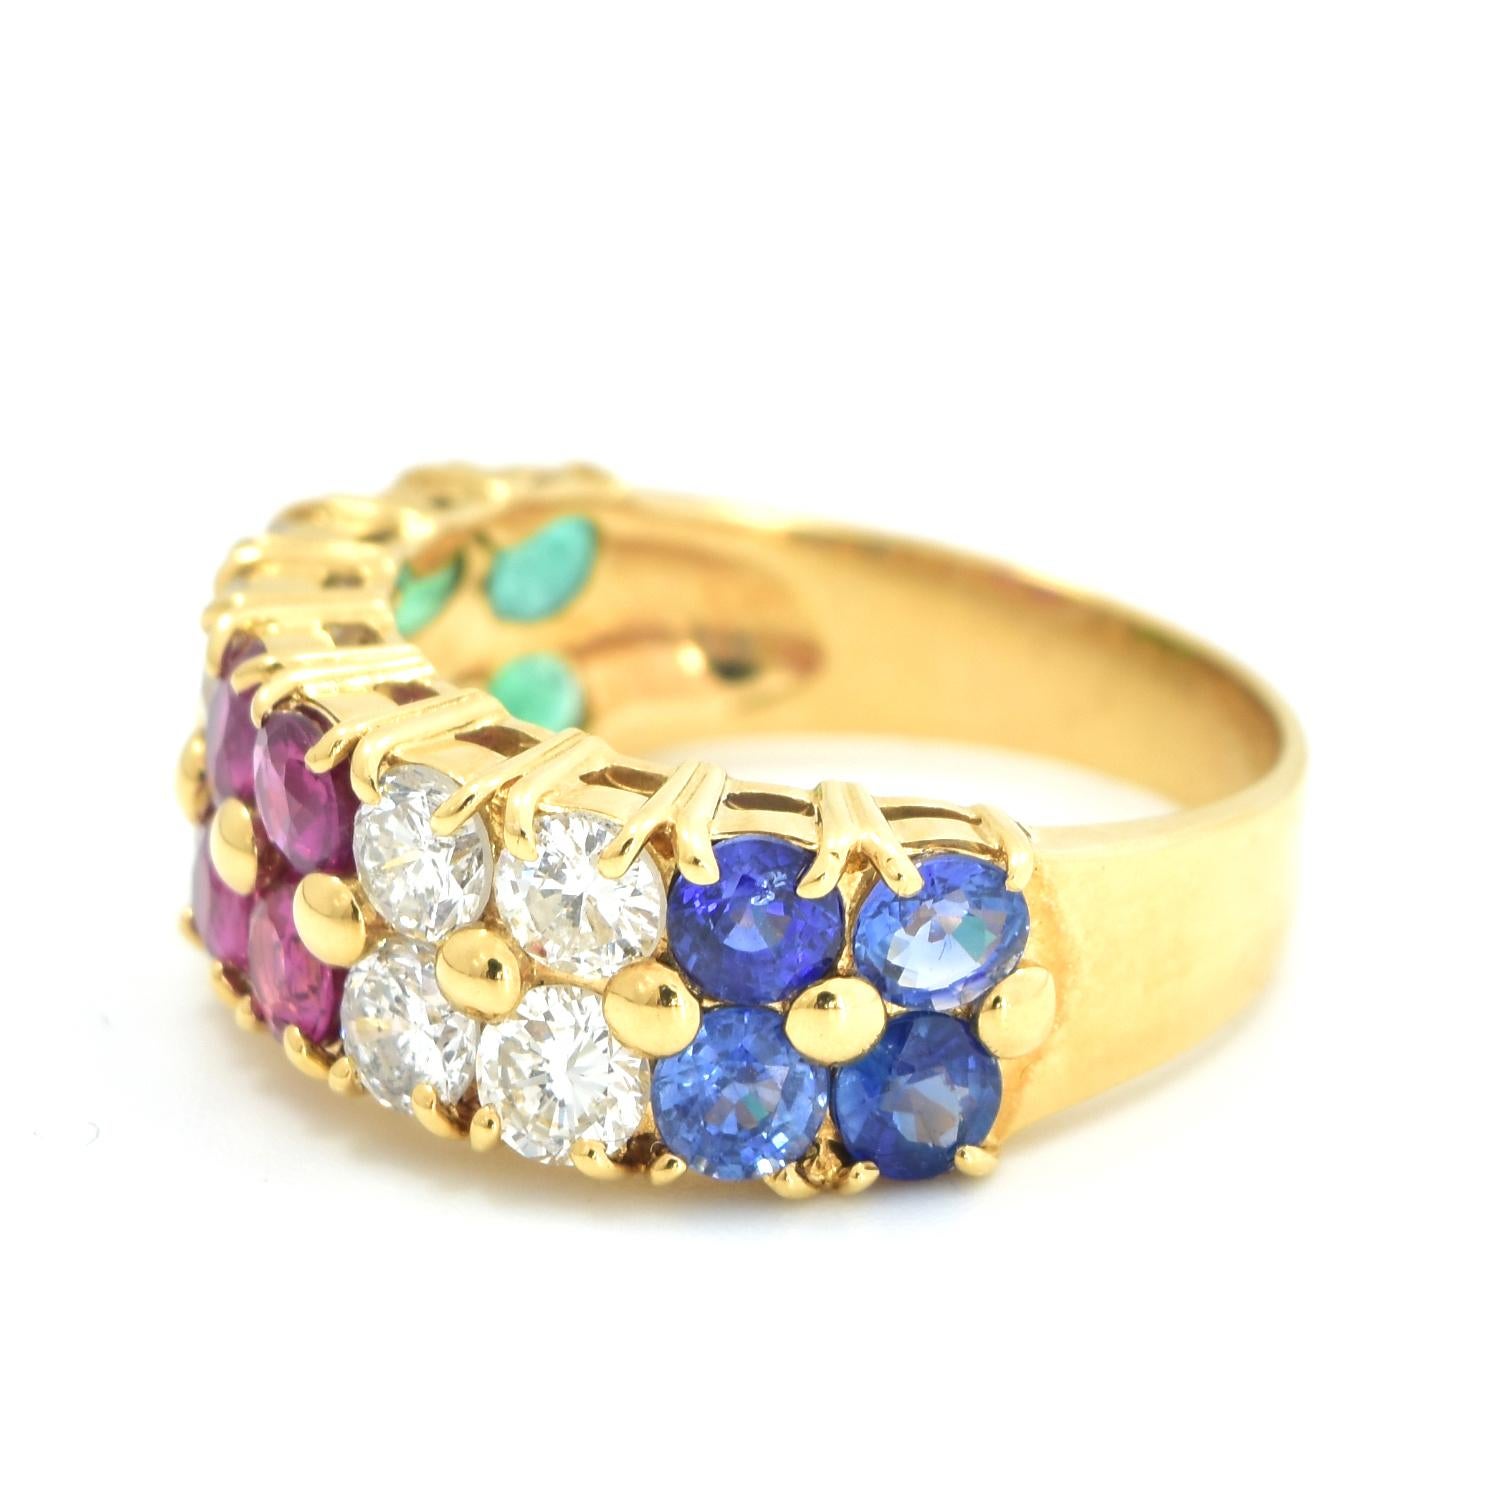 Style: Fashion Ring

Metal Type: Yellow Gold

Metal Purity: 18k

Stones: Four stones –

sapphire, rubies, emeralds, and 8 stone diamonds 1.25 CTW

Ring Size: 7

Total Item Weight (grams): 5.7 grams

​Includes: Brilliance Jewels 2 Year